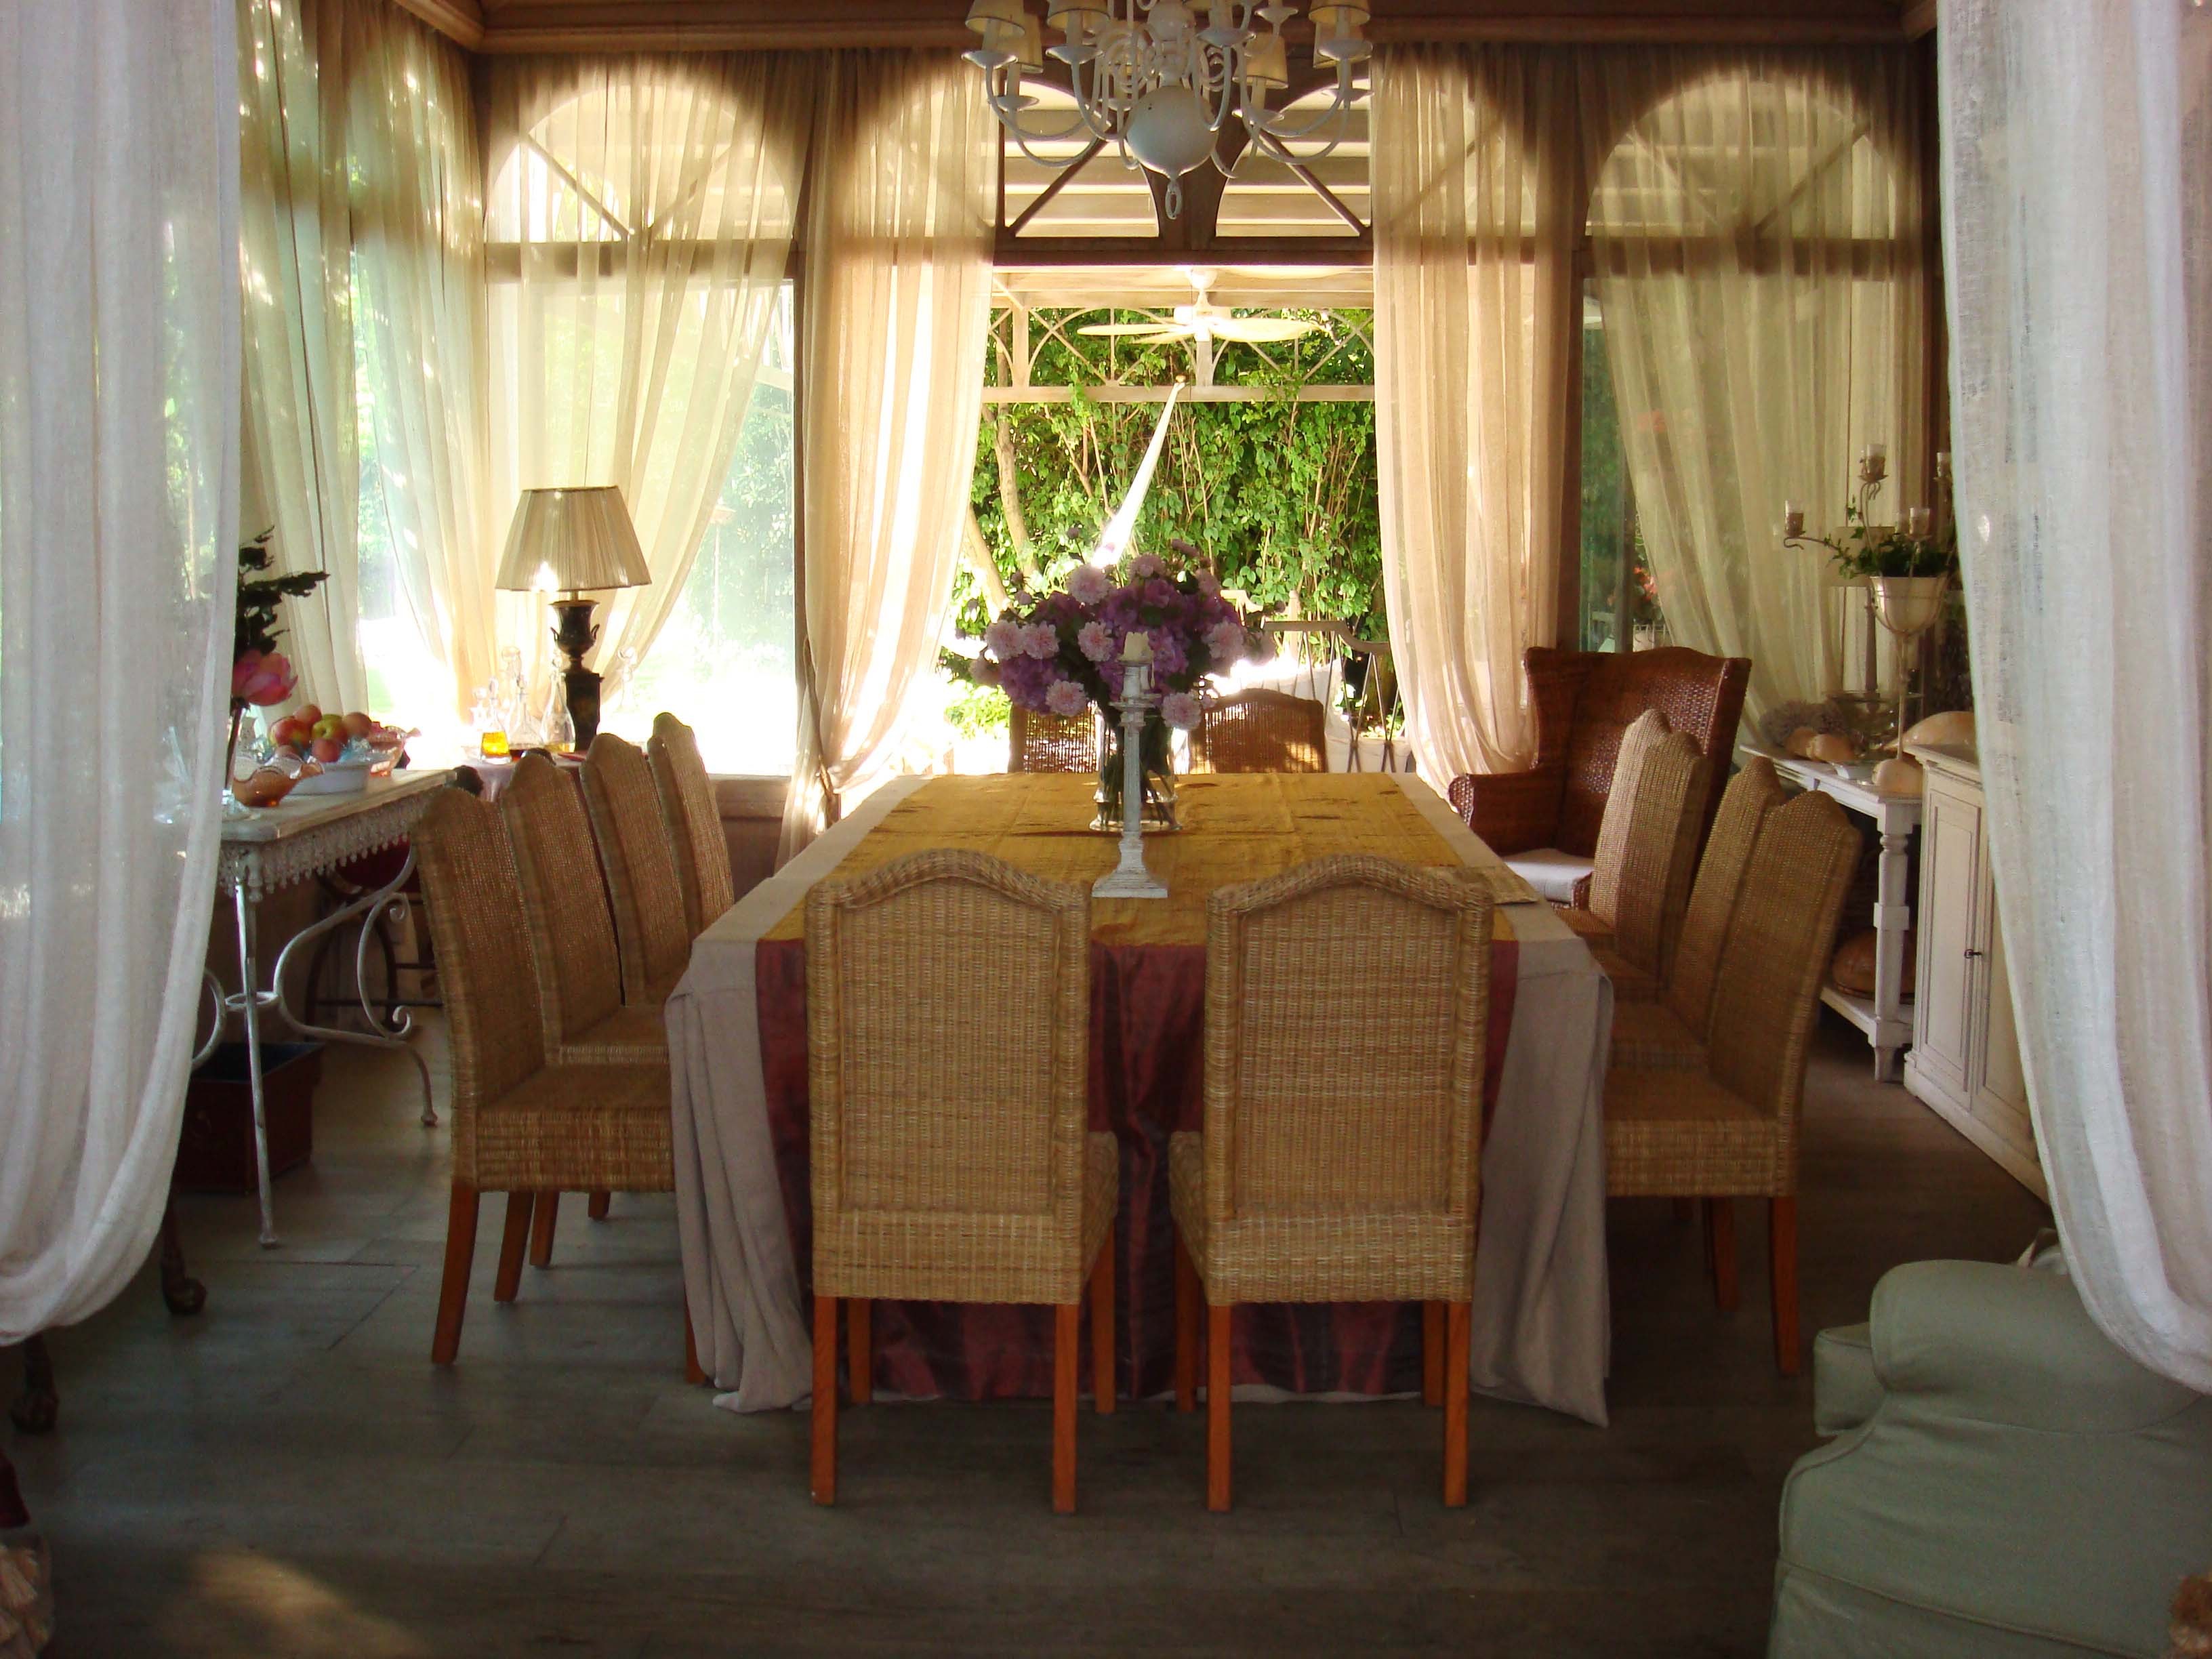 A lunch surrounded by nature - Interior Design